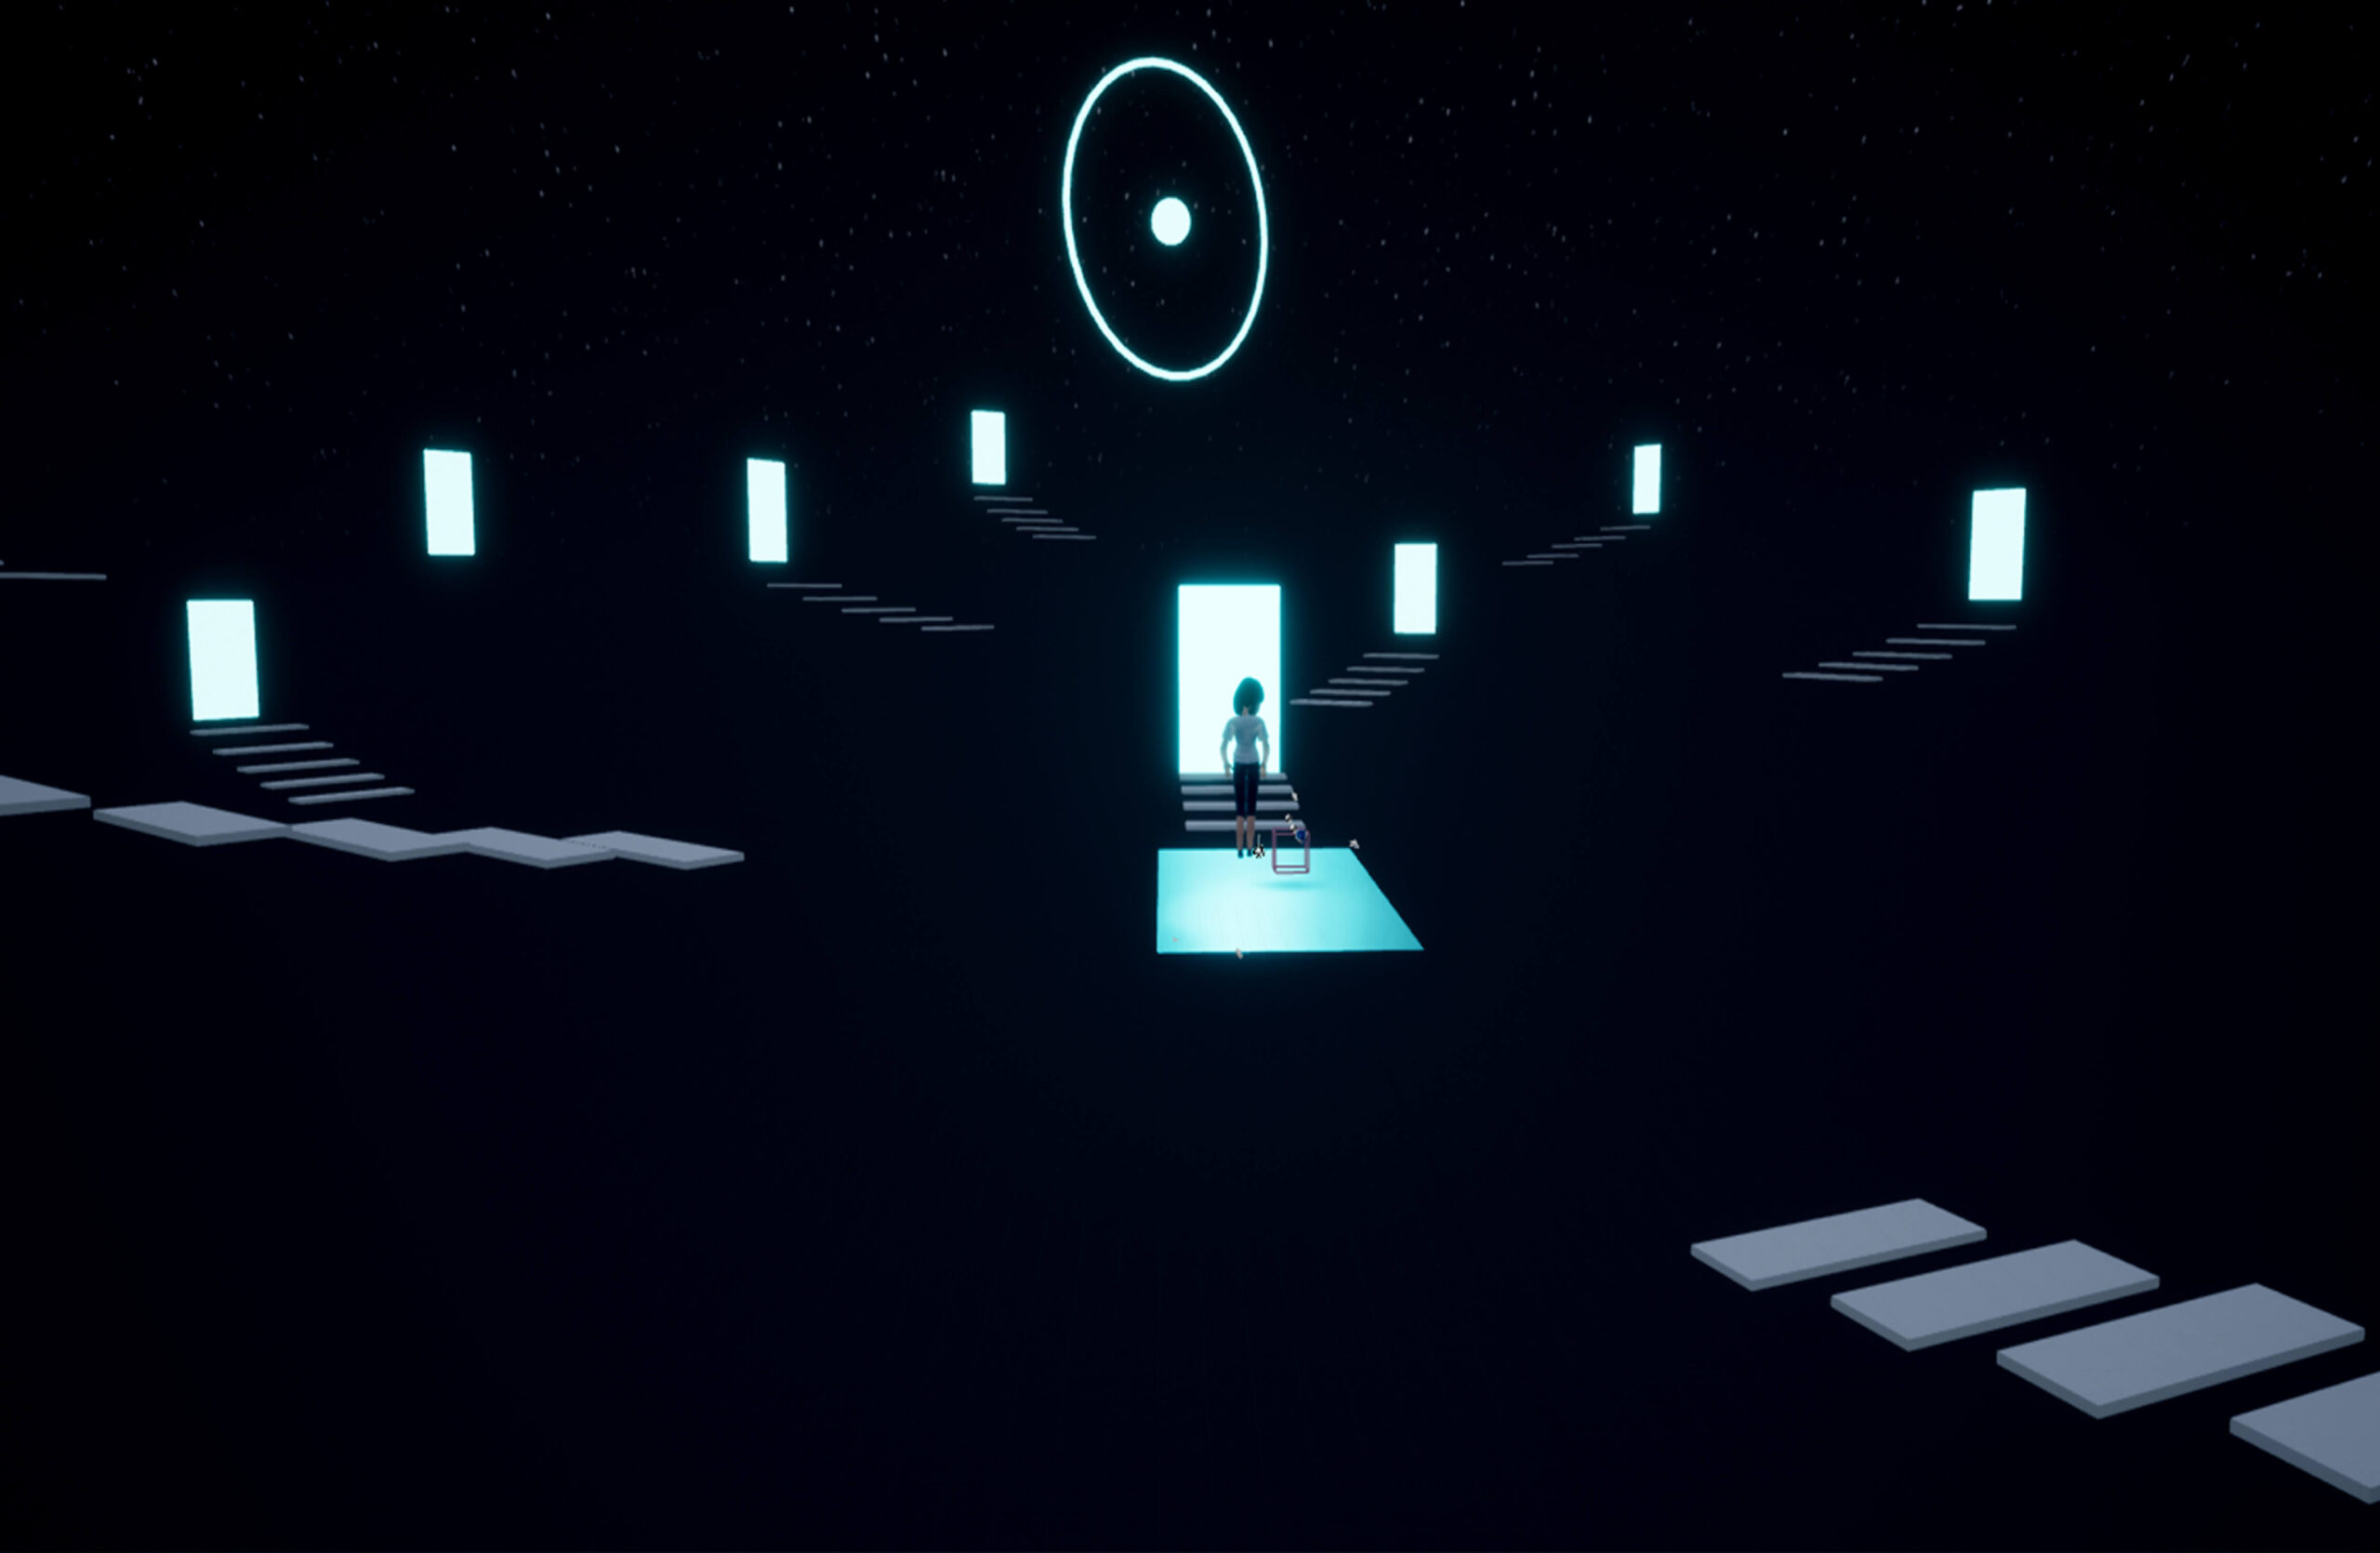 A still image of a platforming game. A character stand in a illuminated square in the middle of a pitch black room.